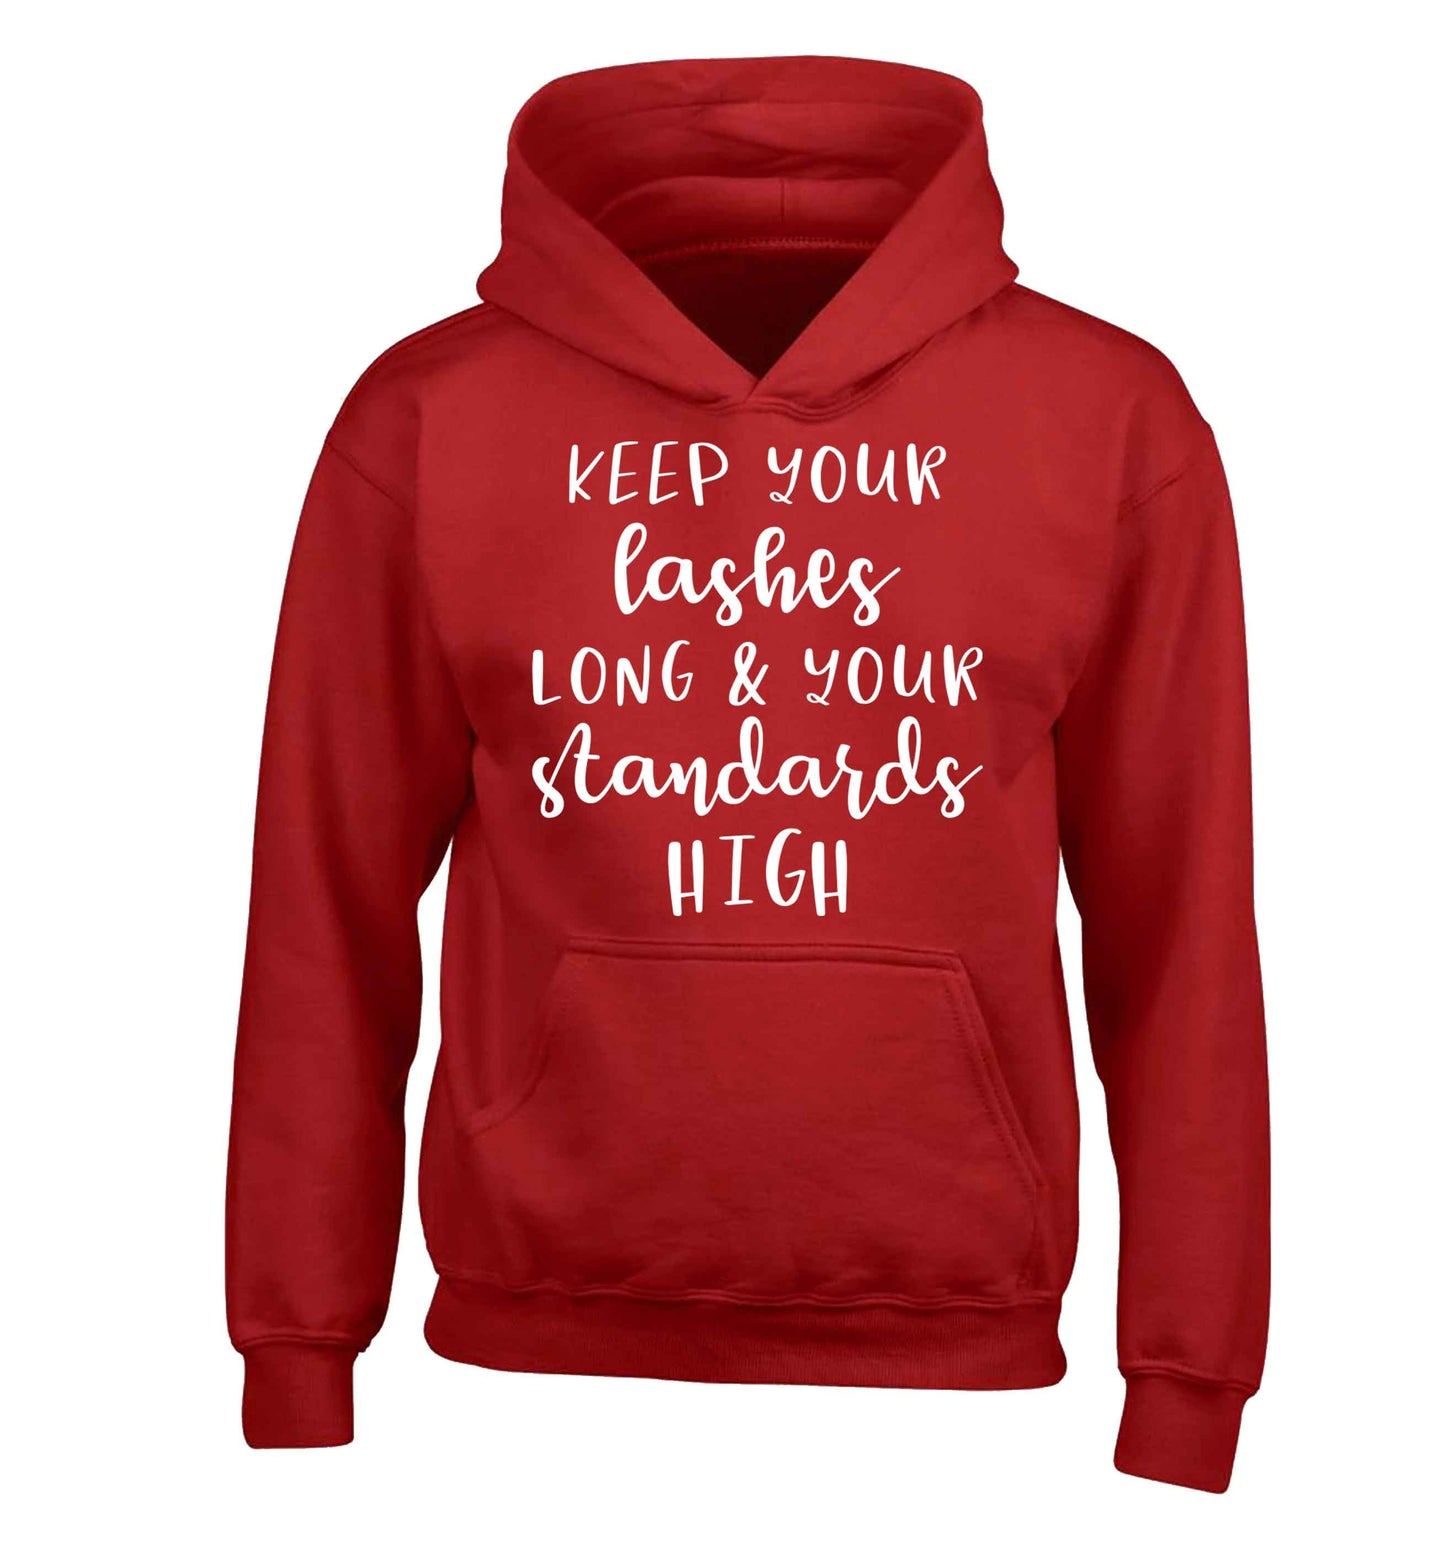 Keep your lashes long and your standards high children's red hoodie 12-13 Years